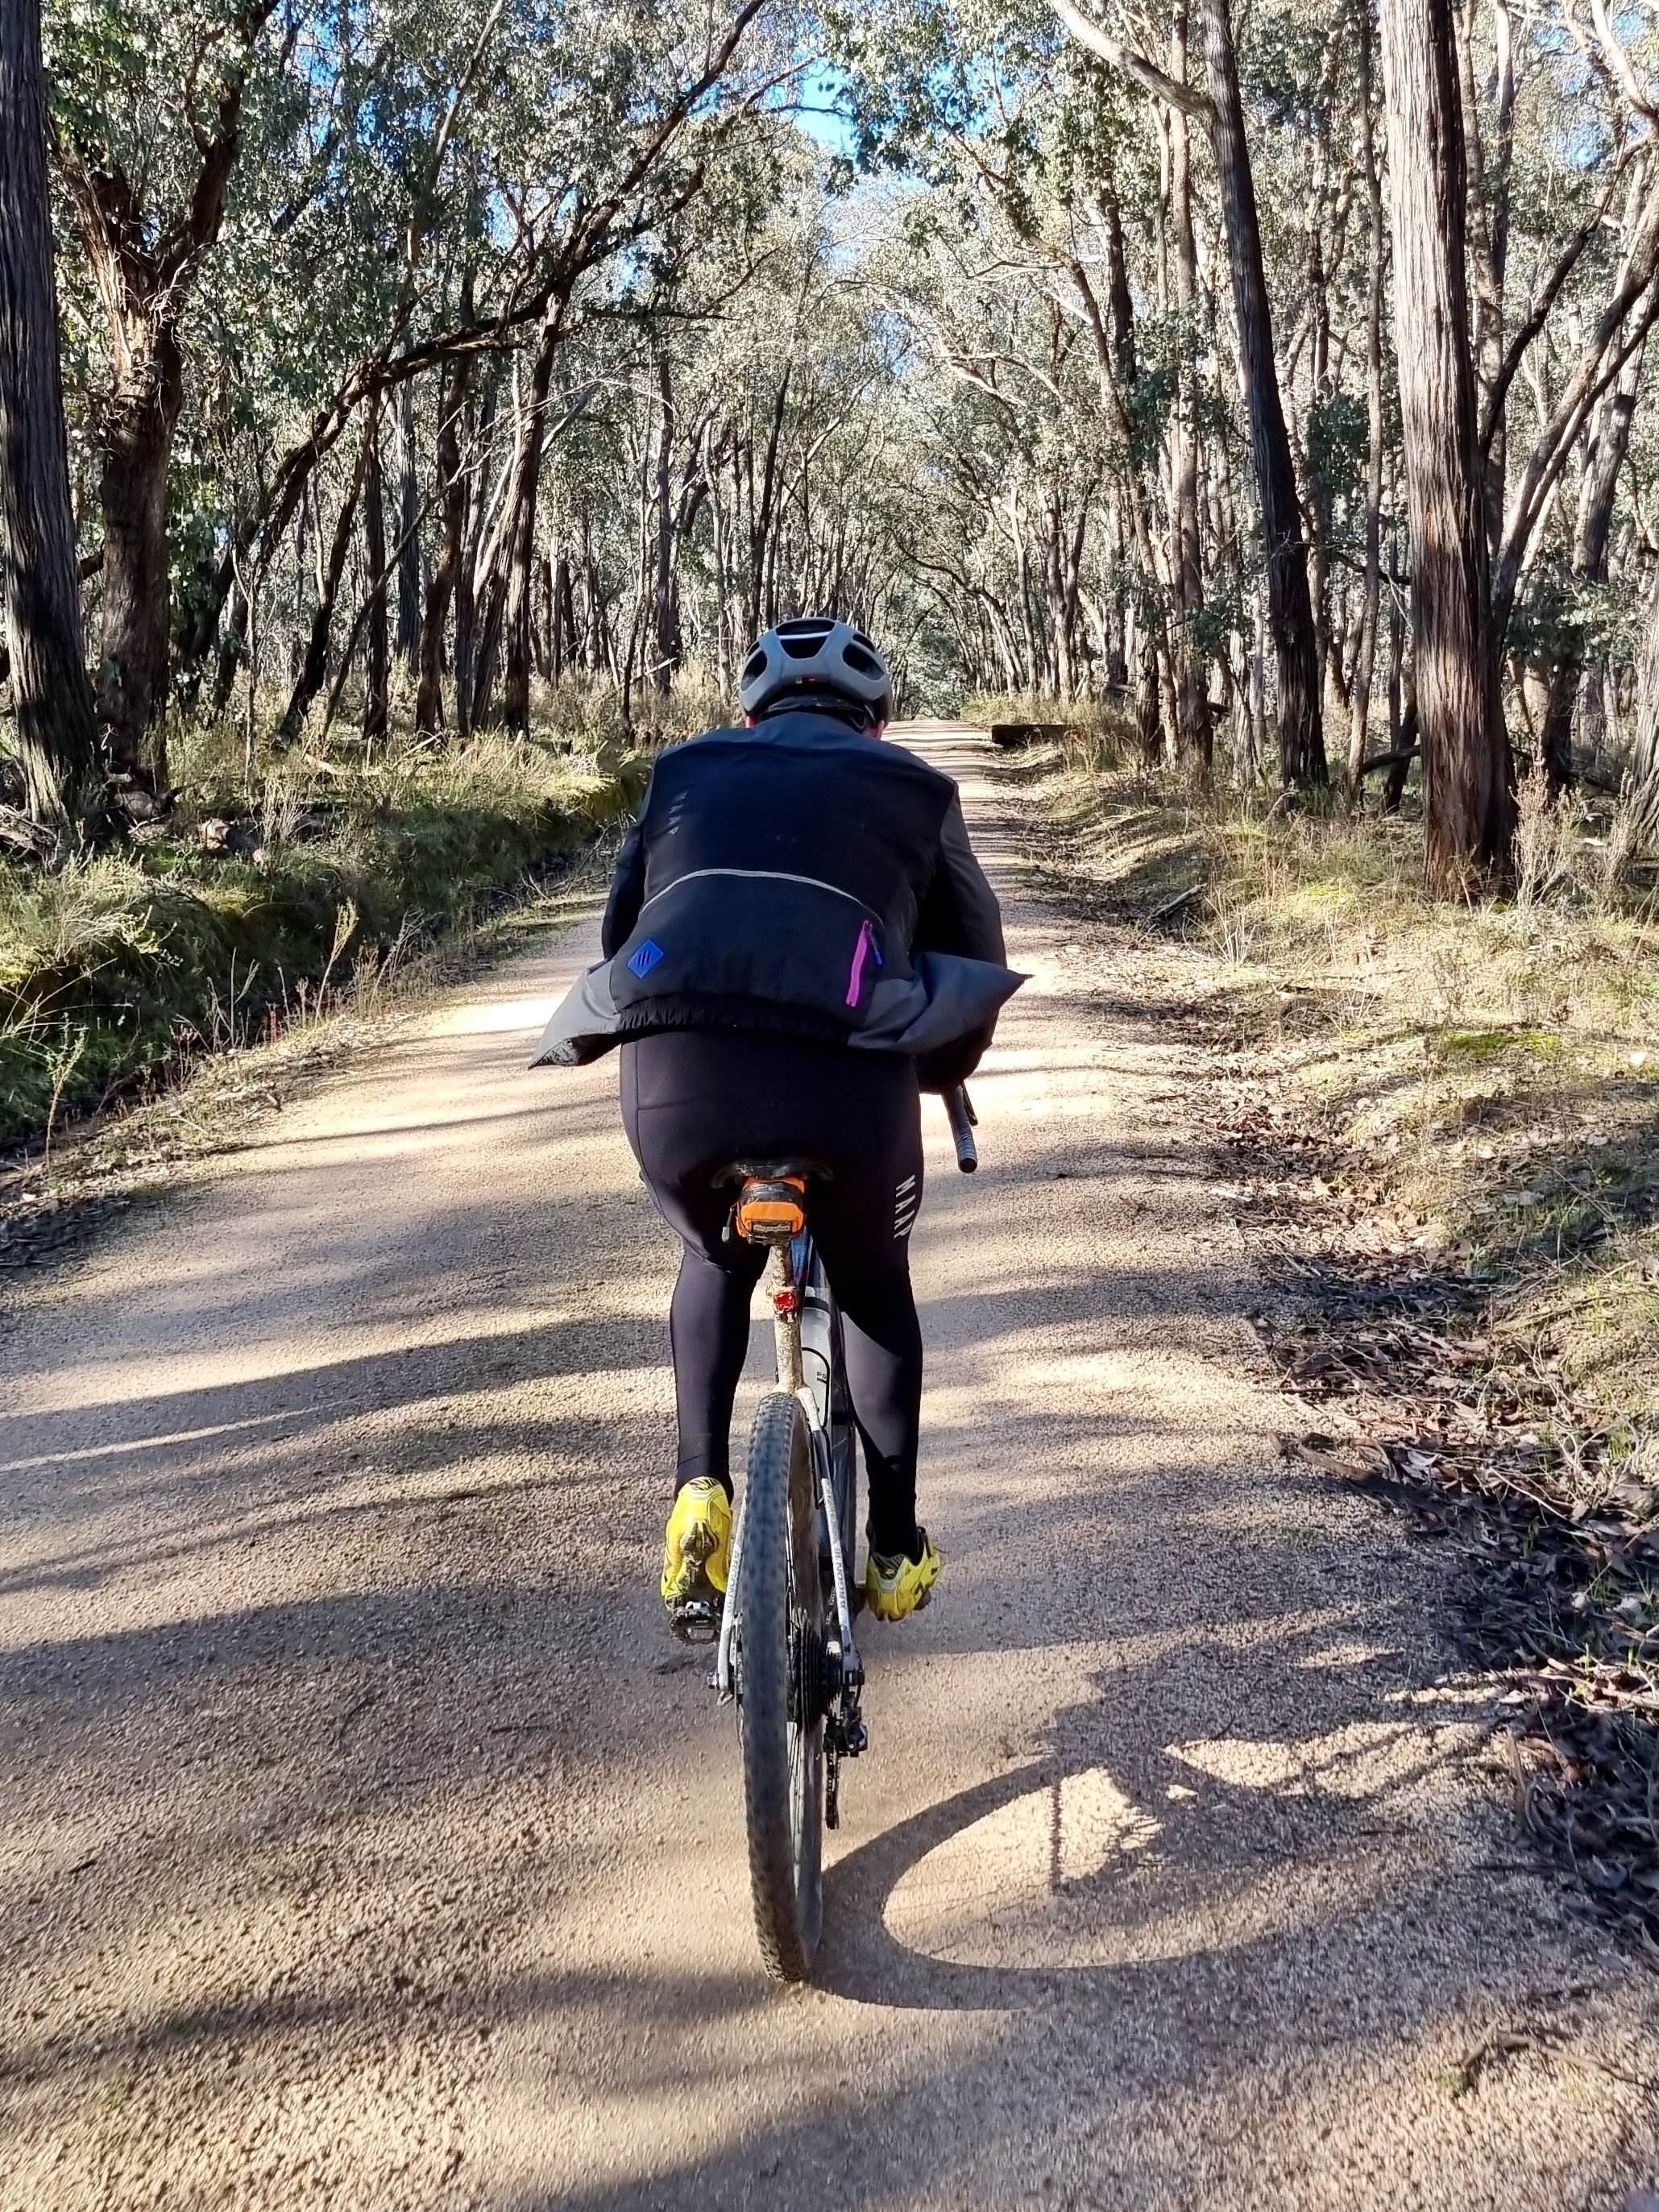 A cyclist riding up a crushed granite gravel road surrounded by native forest